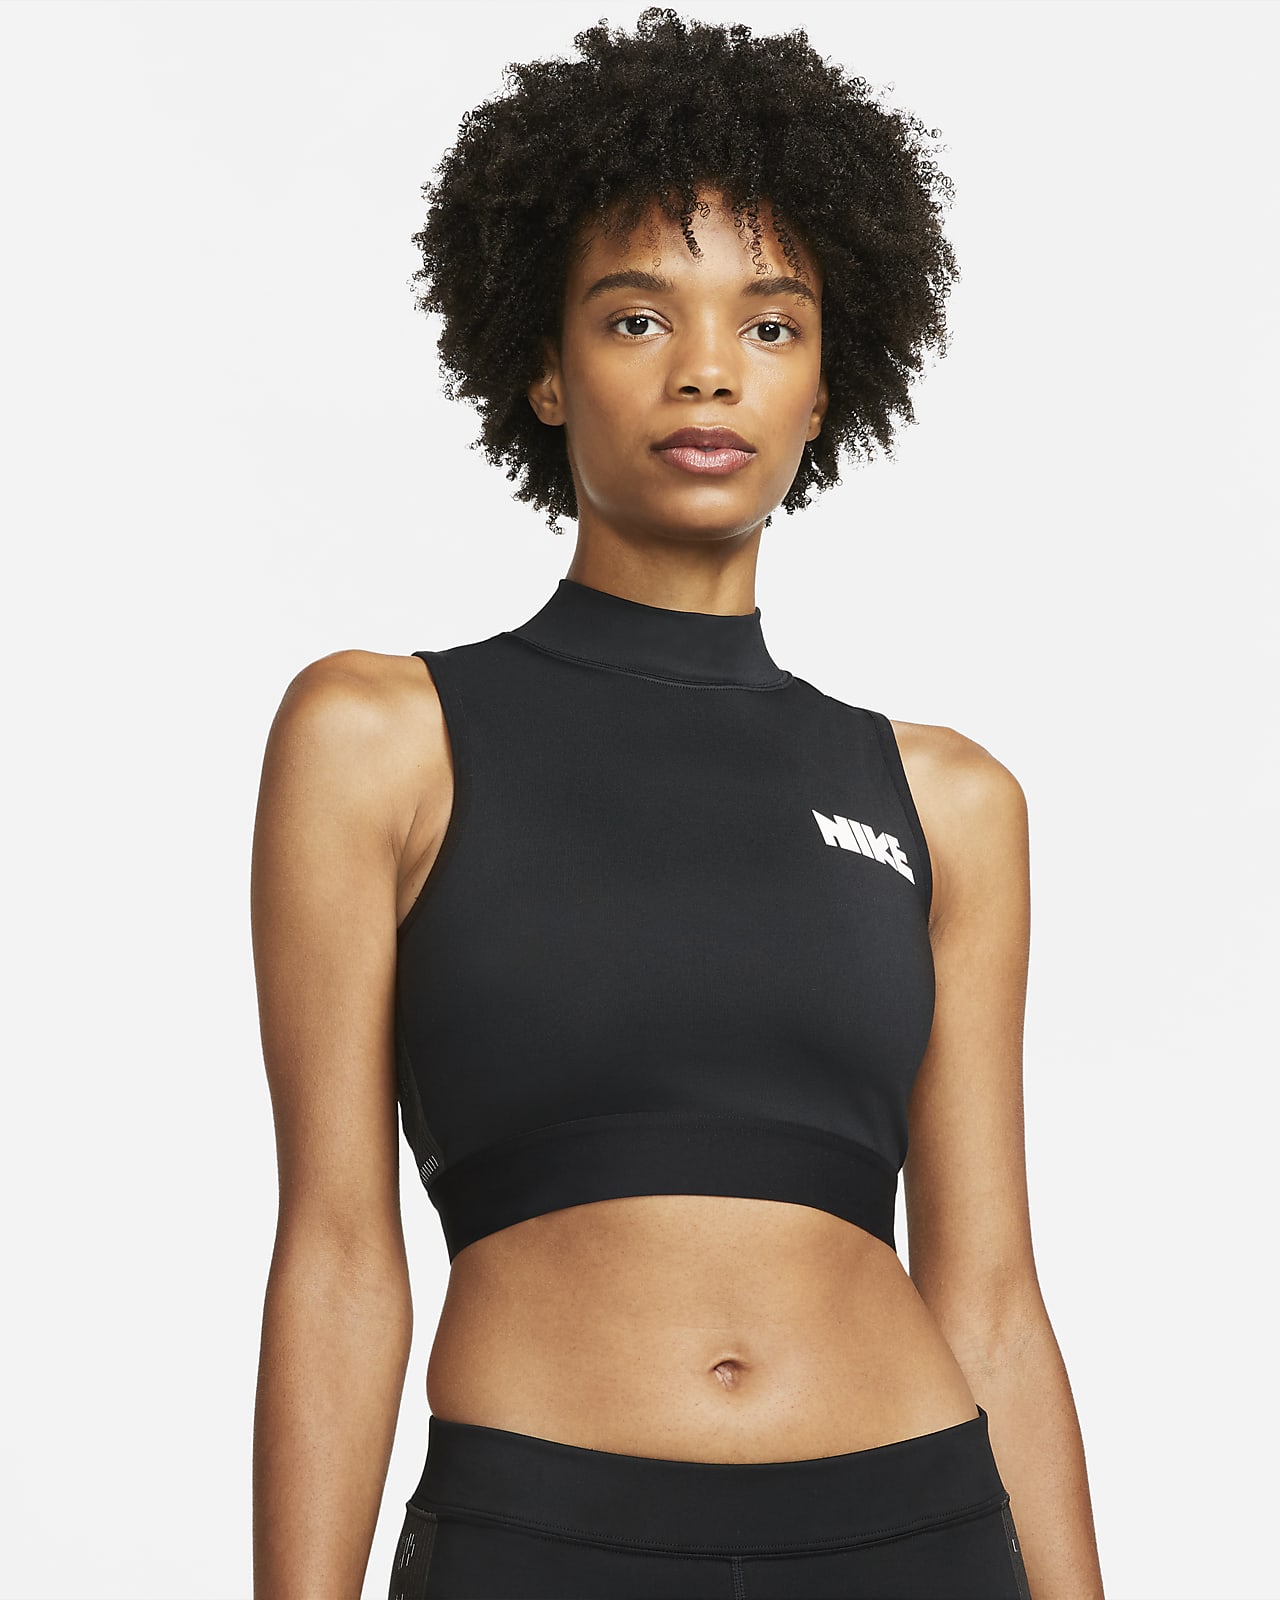 https://static.nike.com/a/images/t_PDP_1280_v1/f_auto,q_auto:eco/cd8e008a-1083-456b-966f-e8669b19e7b4/sacai-crop-top-kNGPZn.png